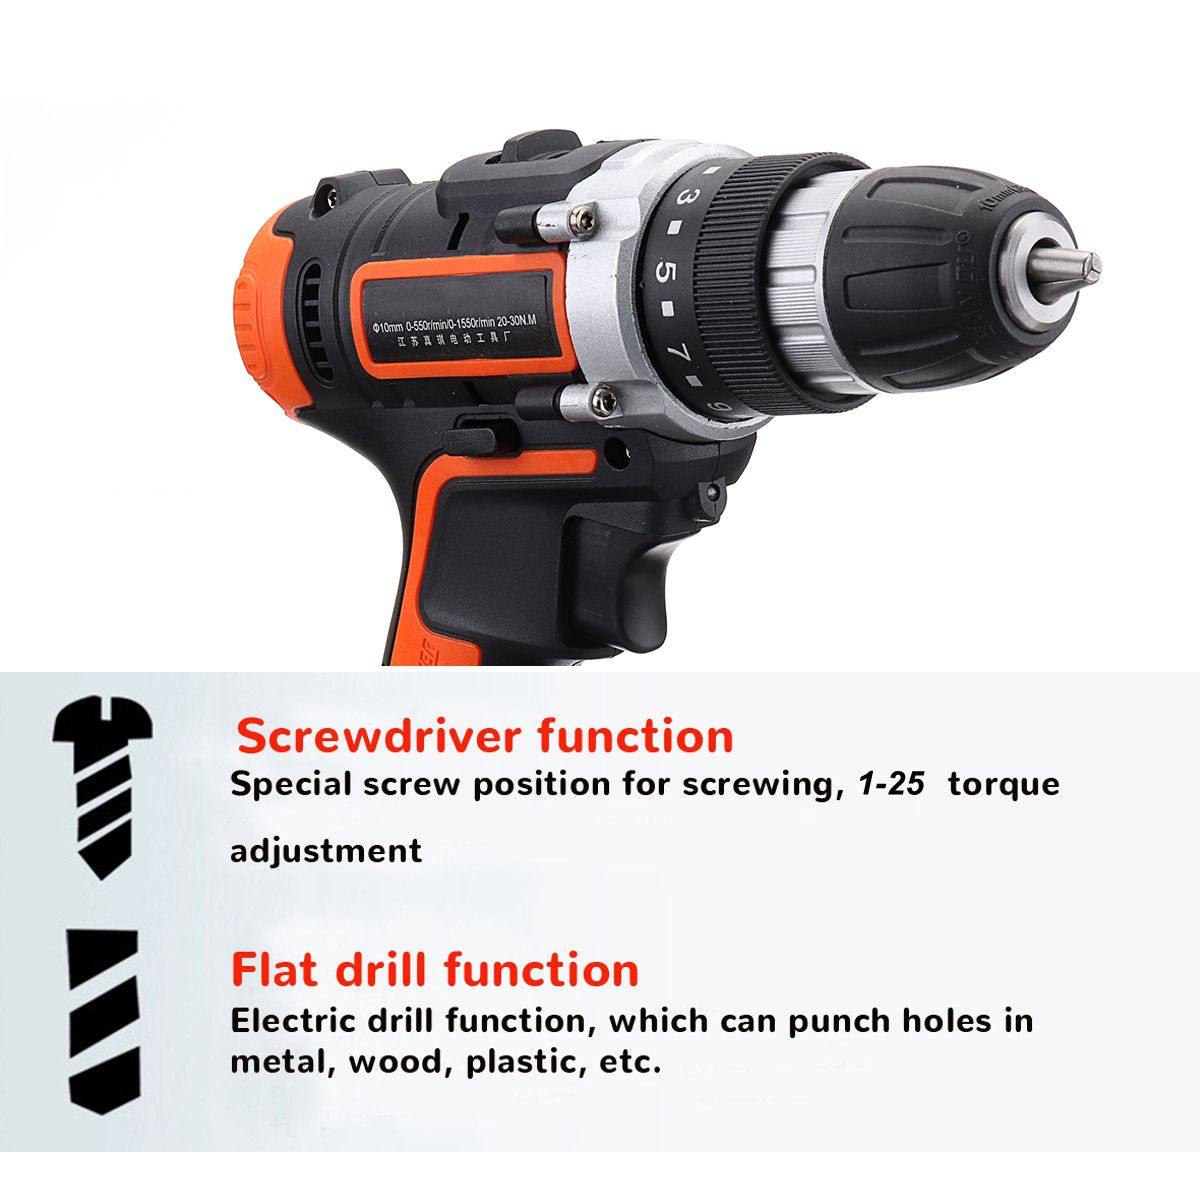 36V-LED-Light-Cordless-Electric-Drill-2-Speed-Digital-Display-Lithium-Battery-Household-Power-Drills-1410427